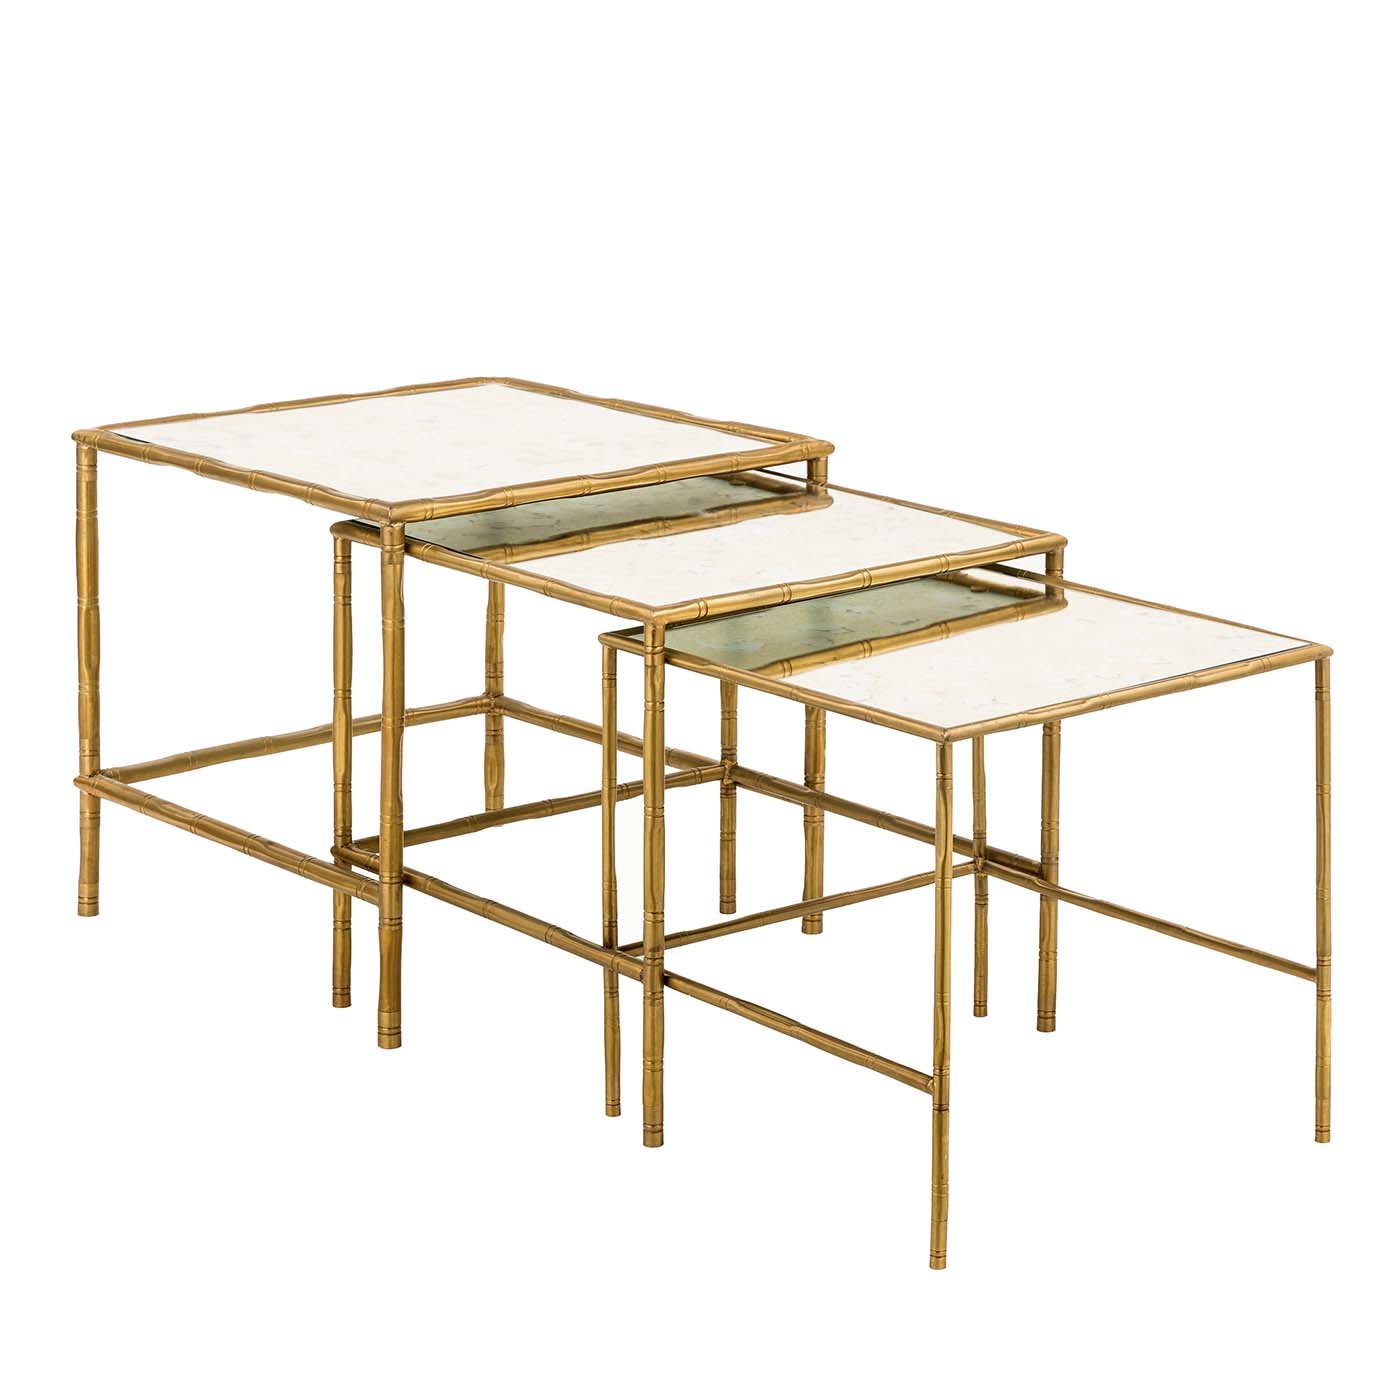 Bamboo Set of 3 Nesting Tables - Bronzetto